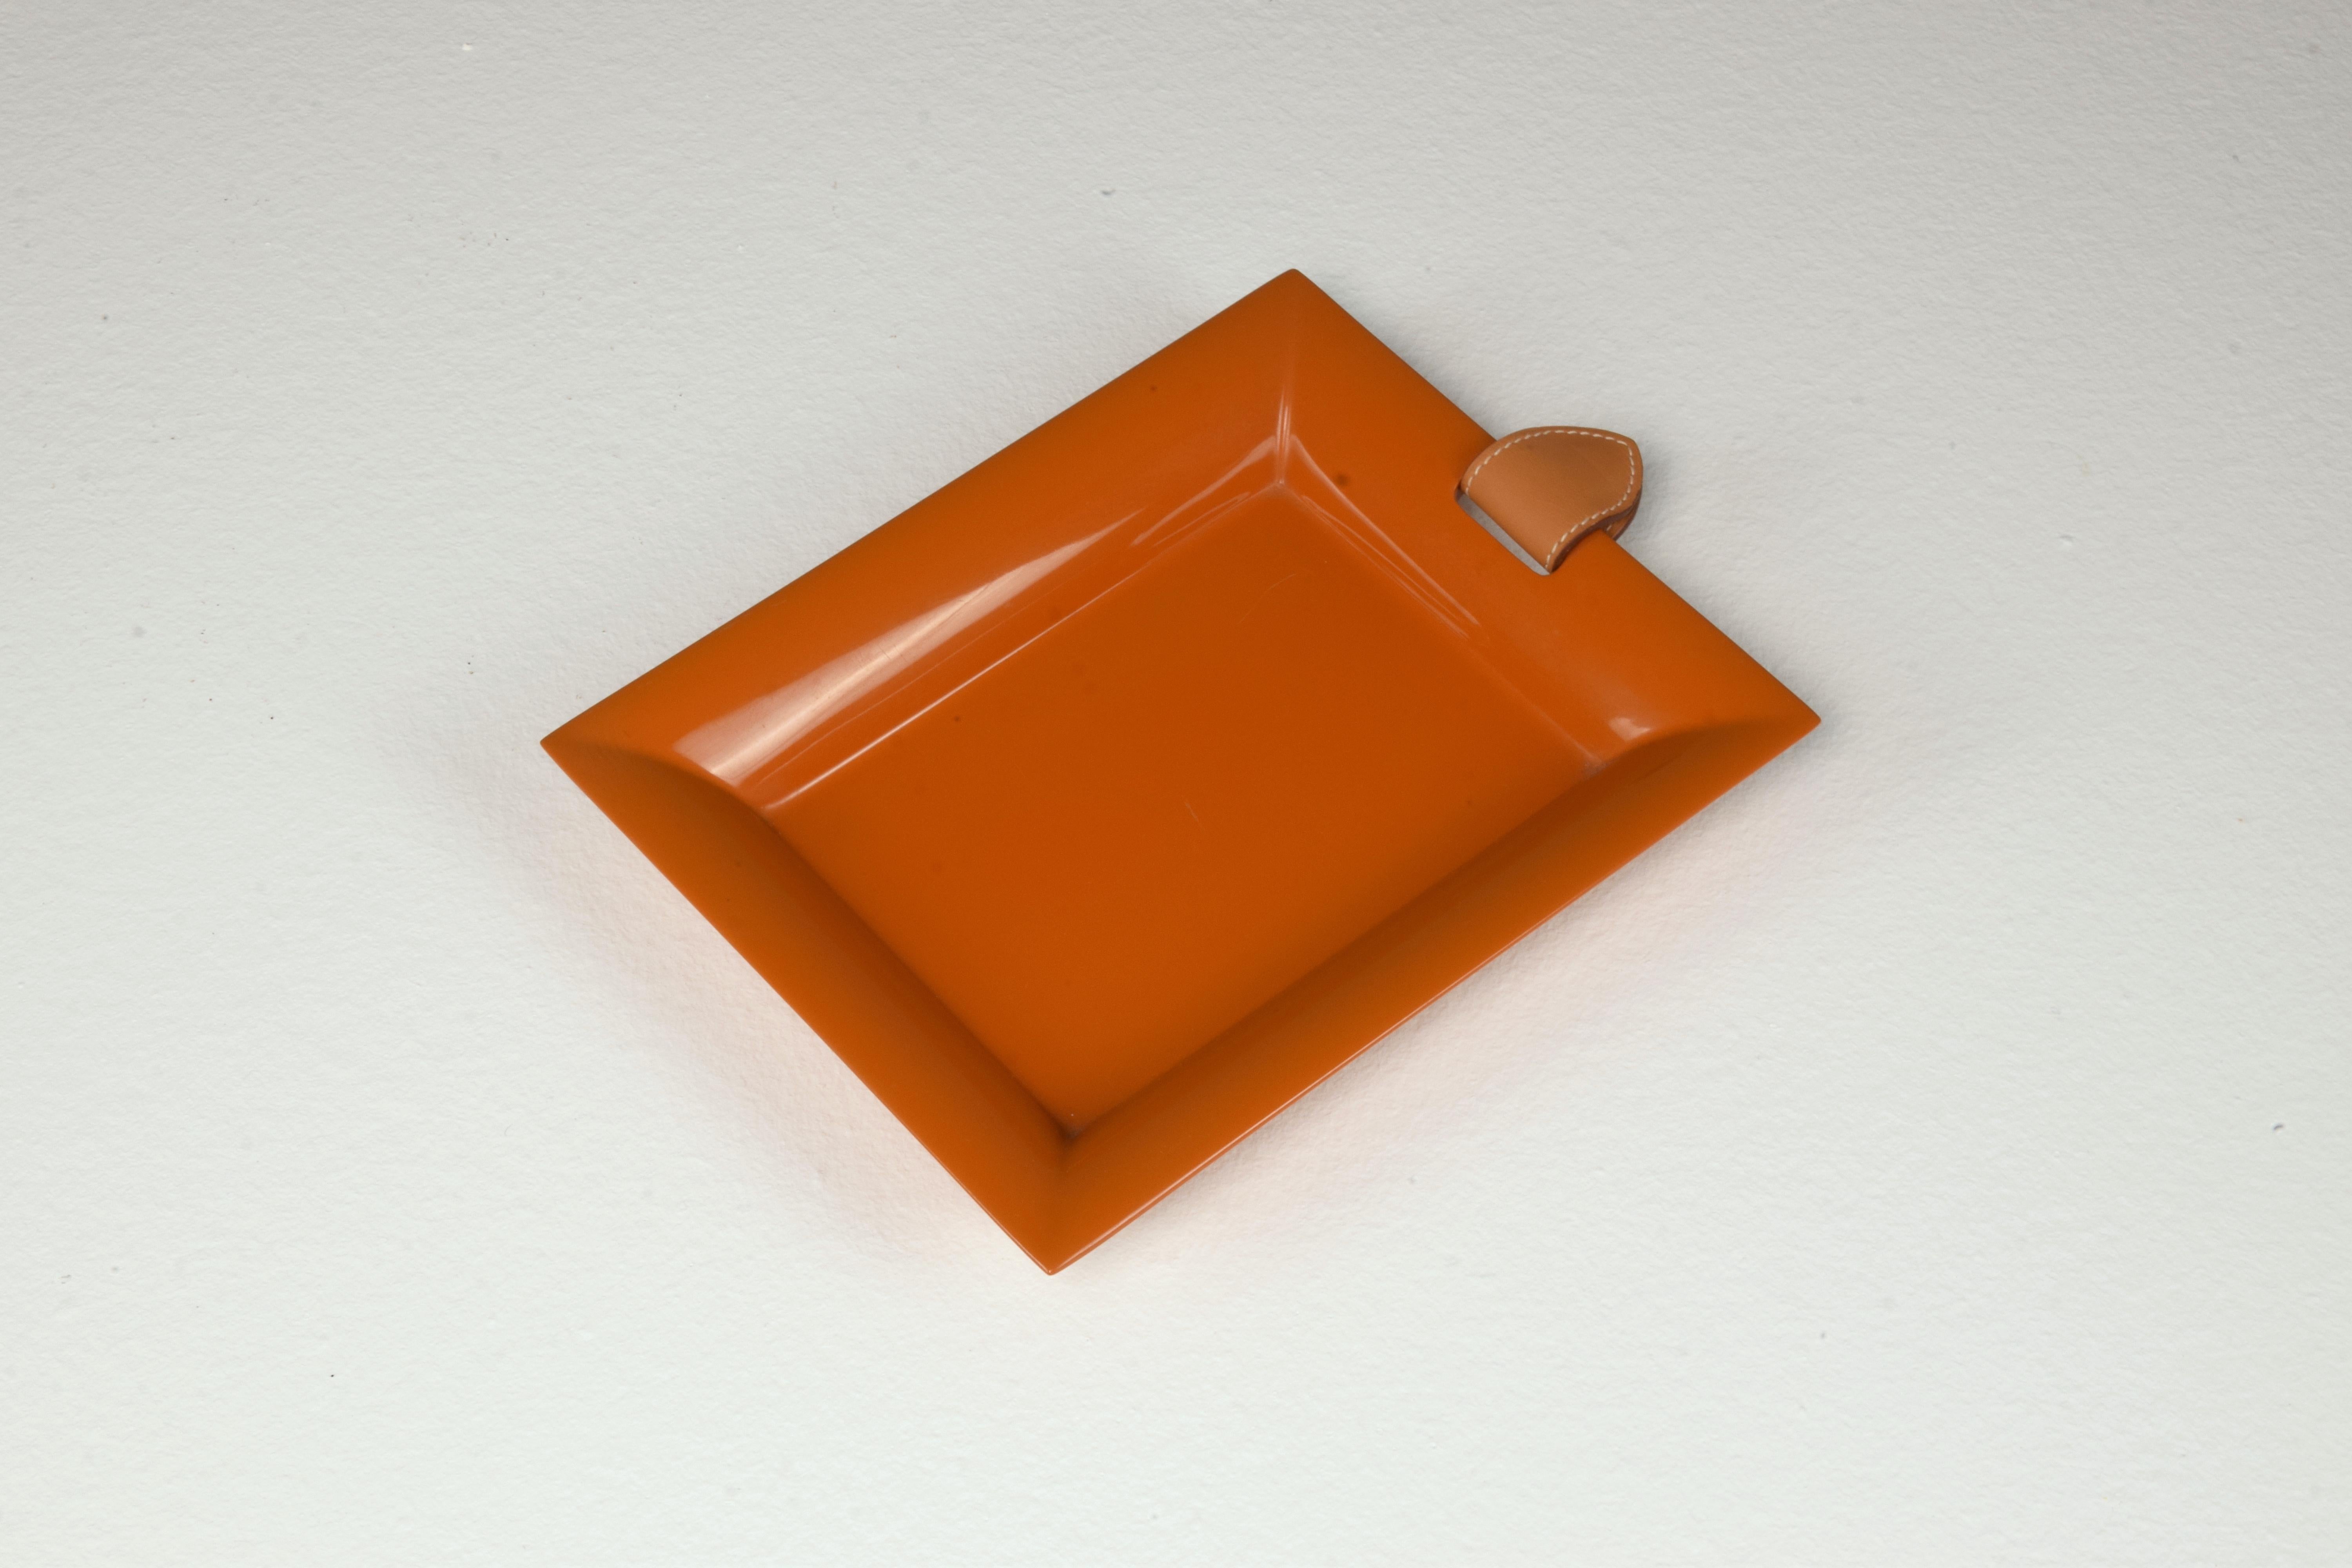 Rectangular vide poche or trinket tray by Hermes in hand-lacquered wood sheathed in a smooth bull calf with a magnetic seel in smooth bull calf stitched saddle. 
Lacquered in the joyful, rich iconic Hermes orange. 
Shiny lacquer set on top and